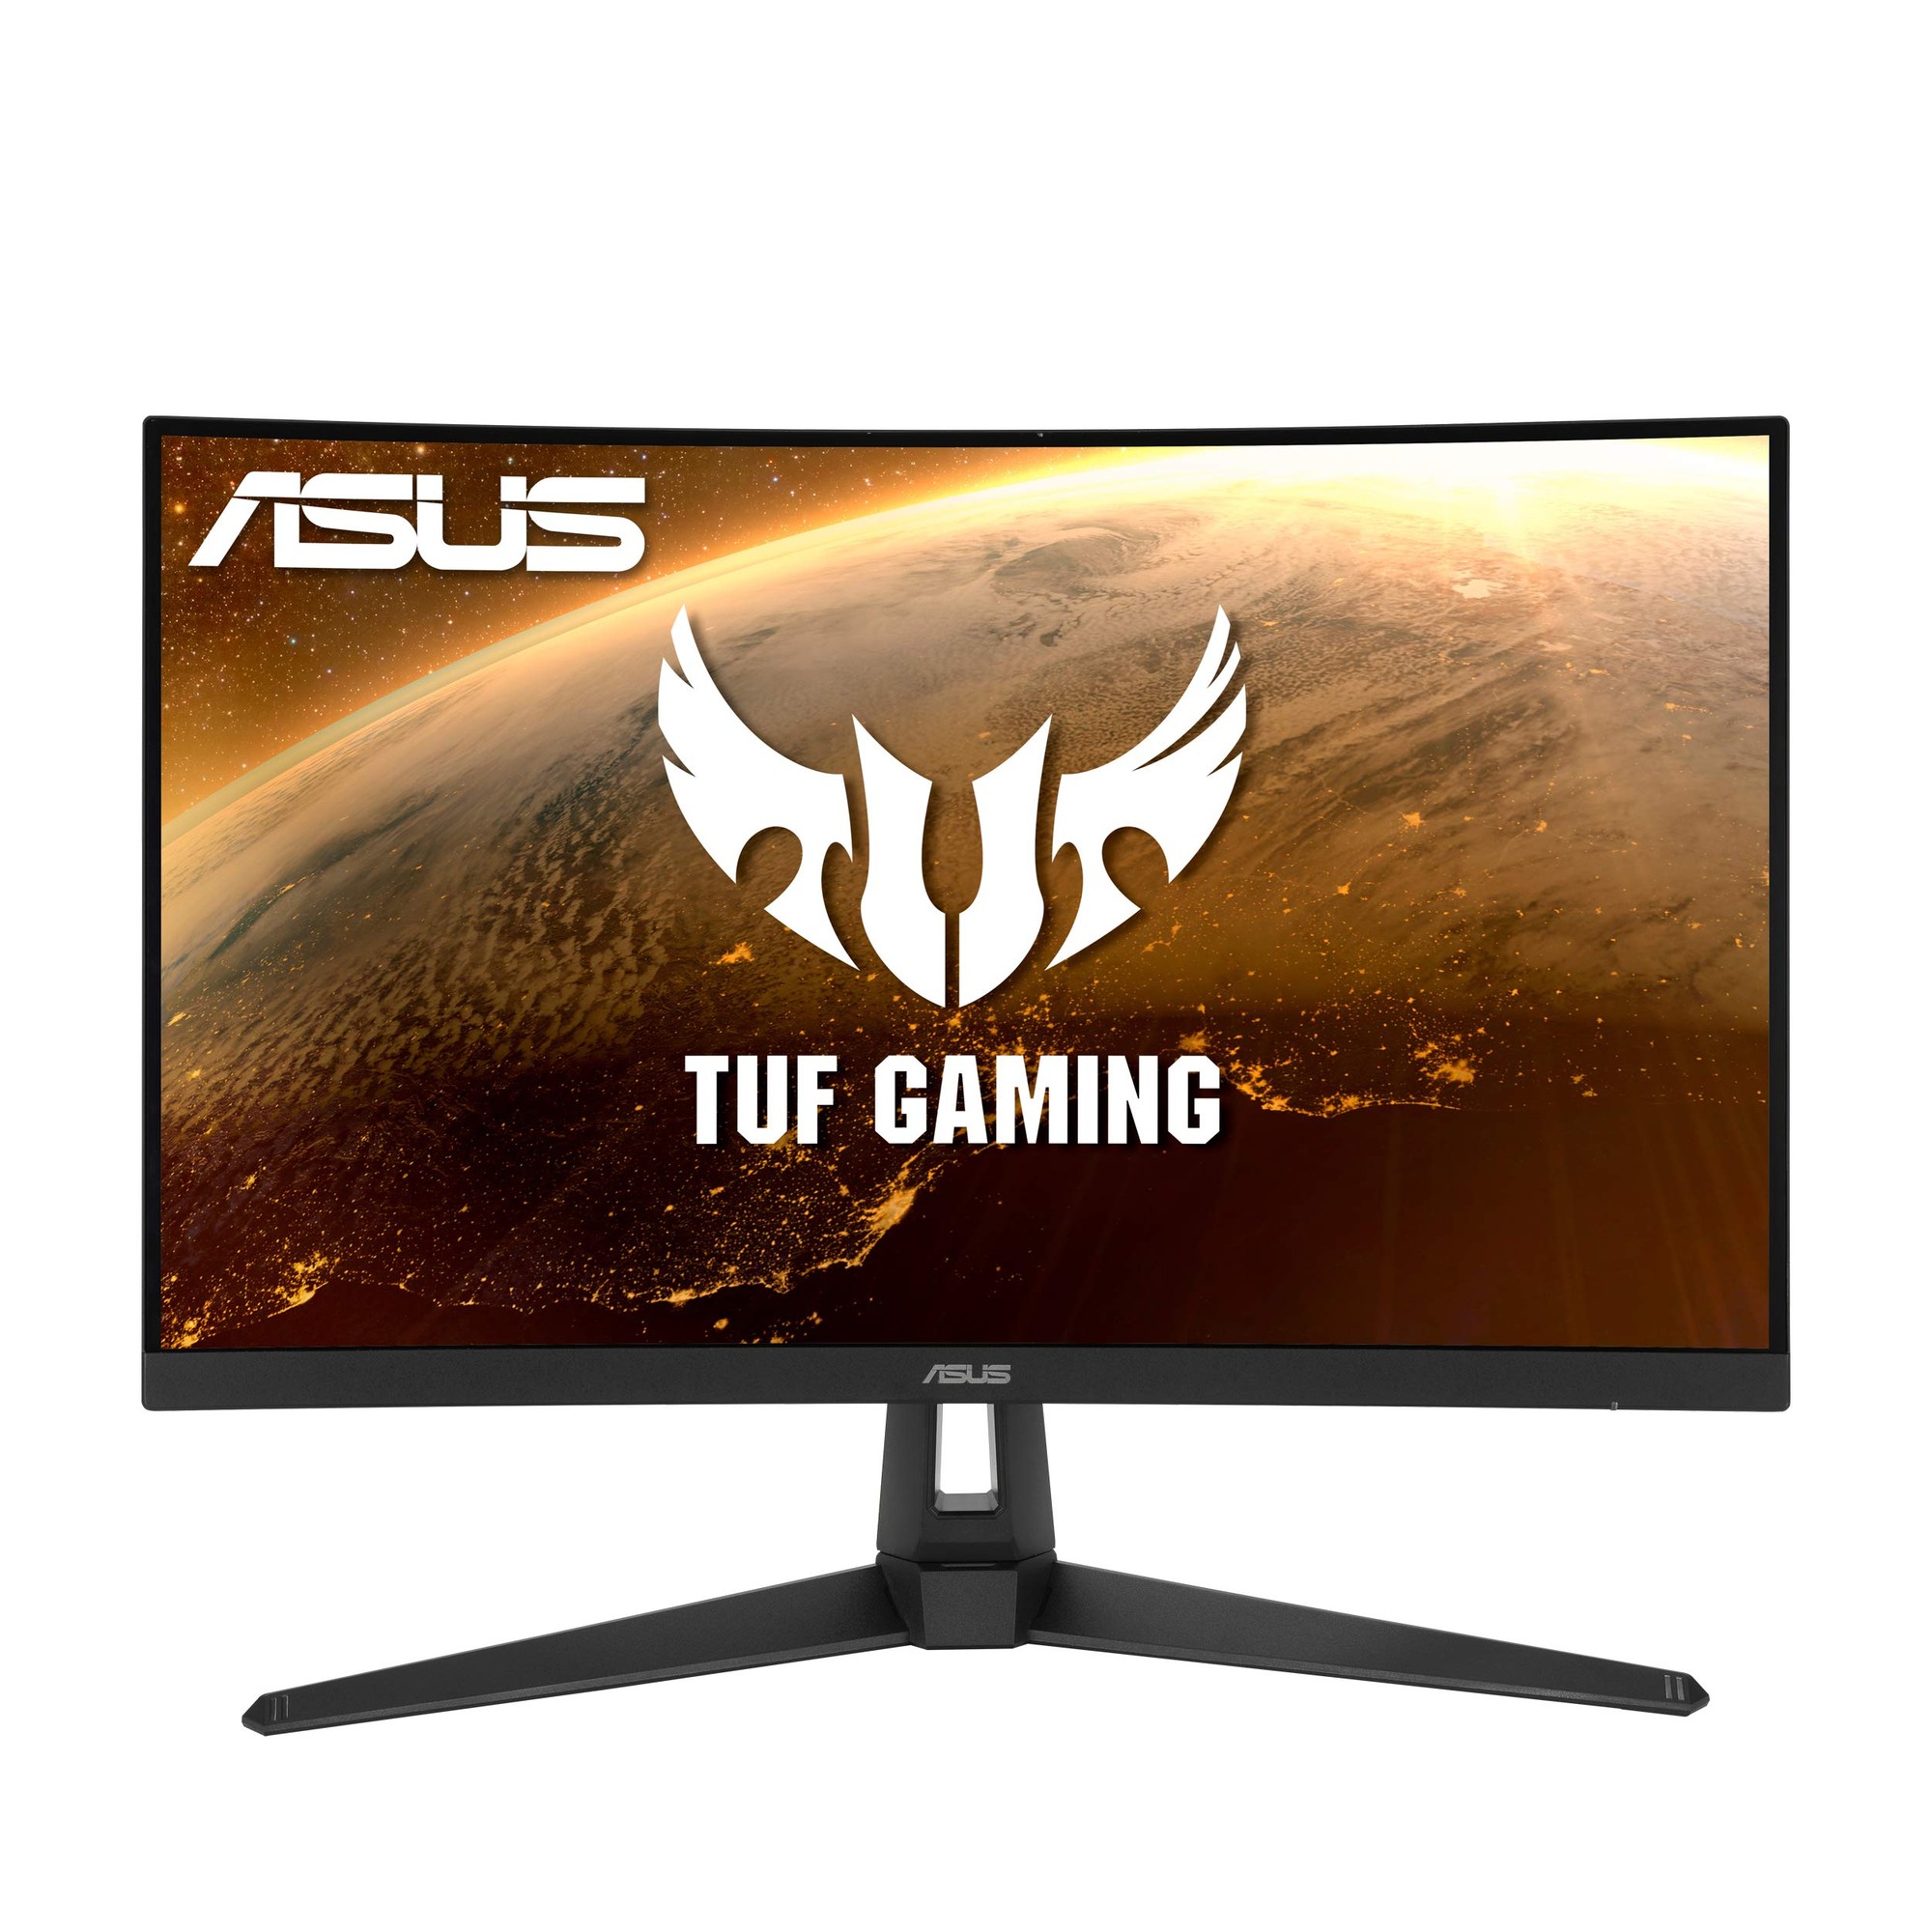 TUF Gaming VG27VH1B 27" Curved Monitor  1080P Full HD  165Hz (Supports 144Hz) 